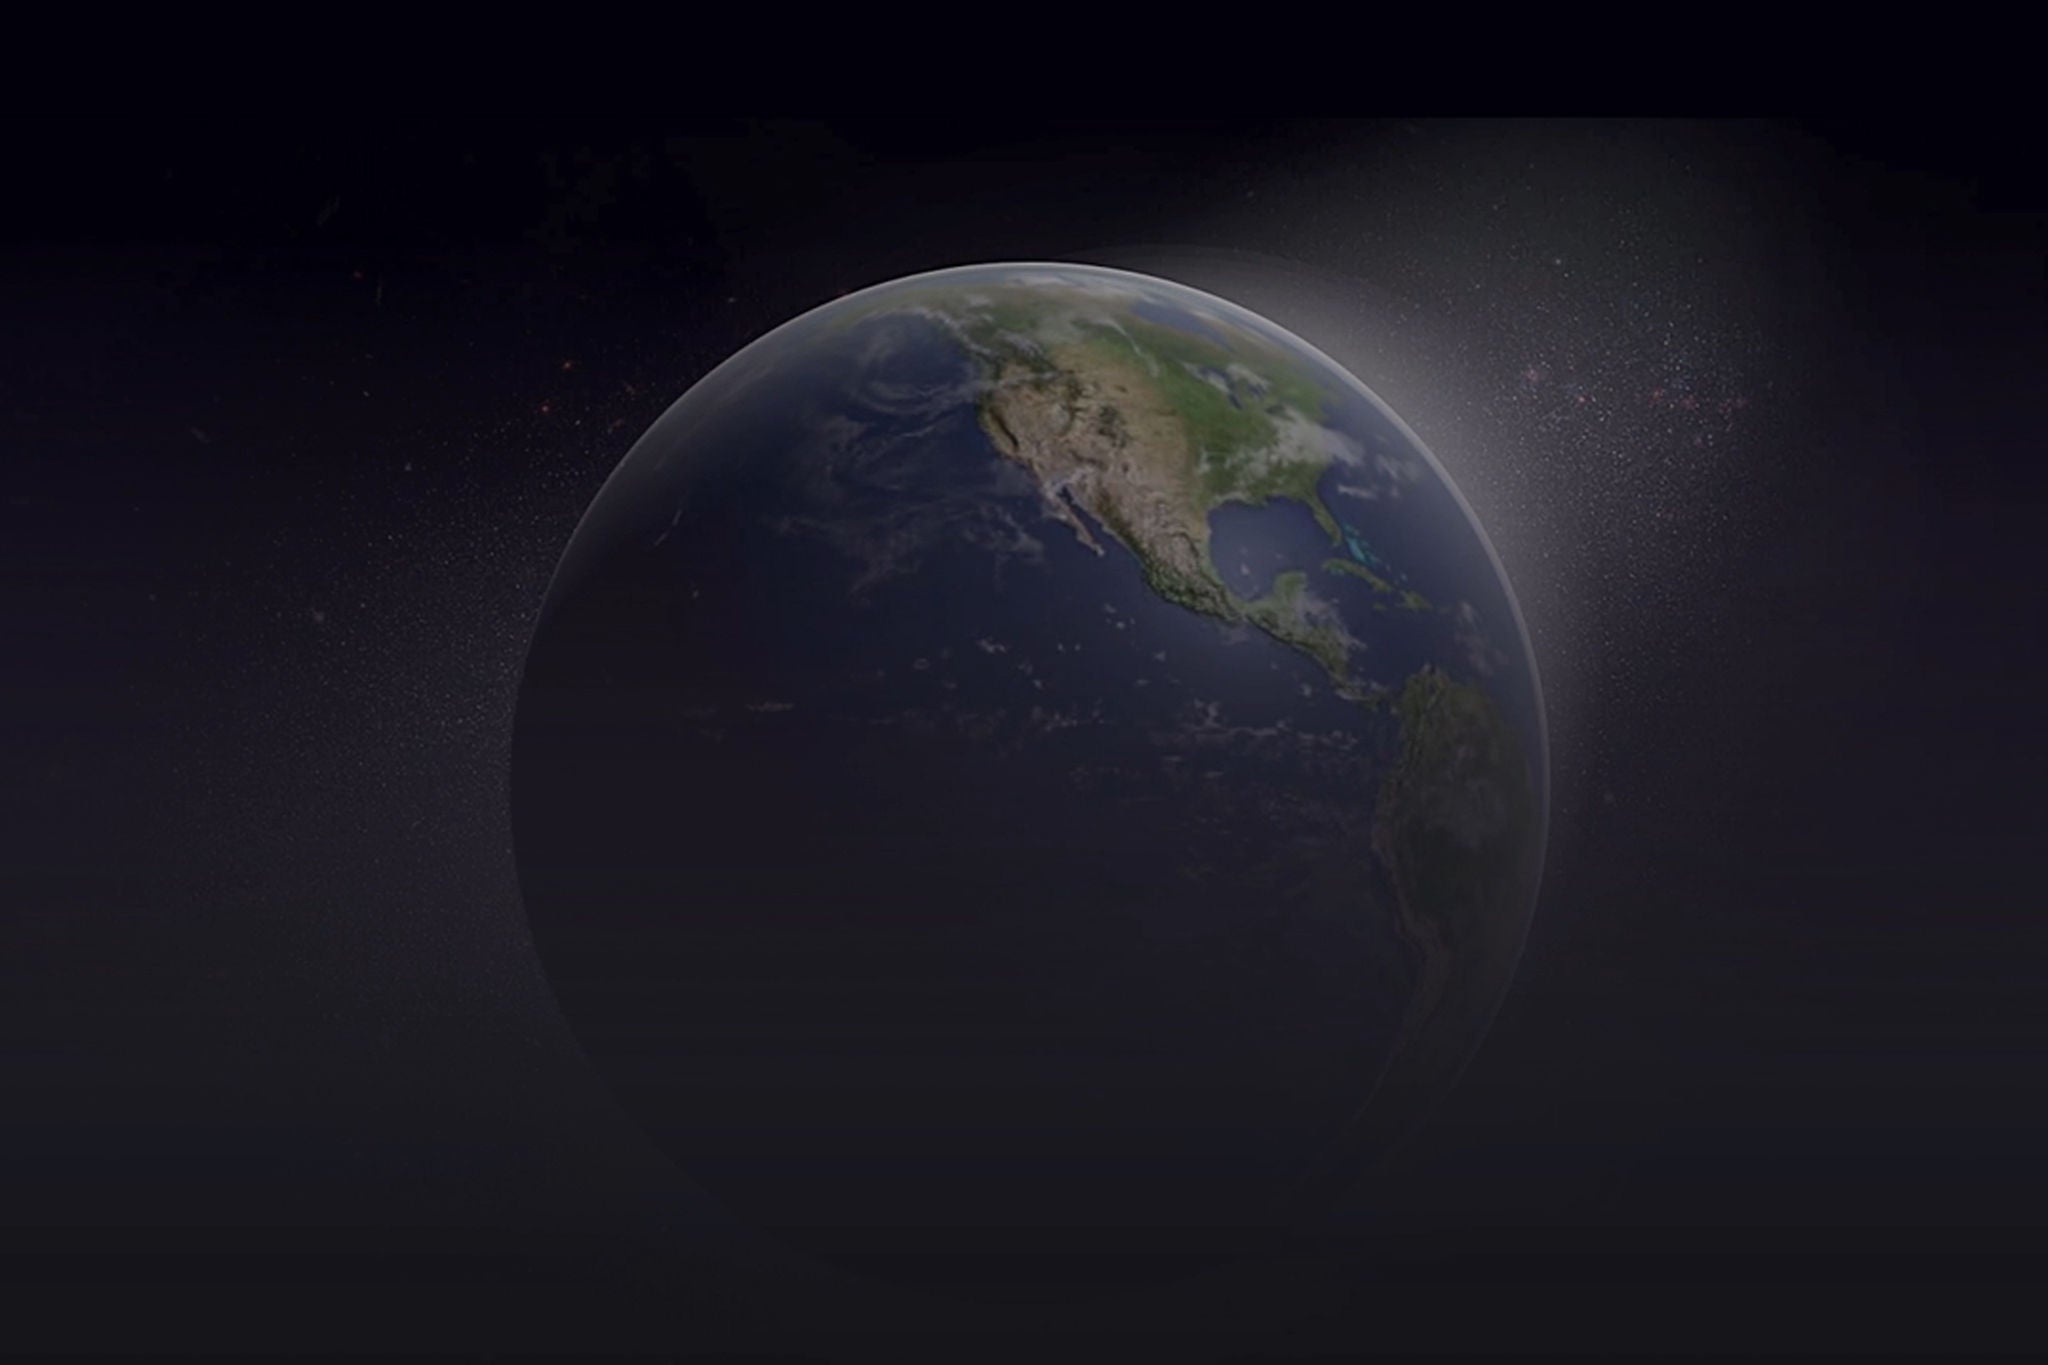 Sphere of Earth planet at night isolated on dark black background. Surface of Earth. Globe. City lights on planet. Life of people. Solar system element. Elements of this image furnished by NASA